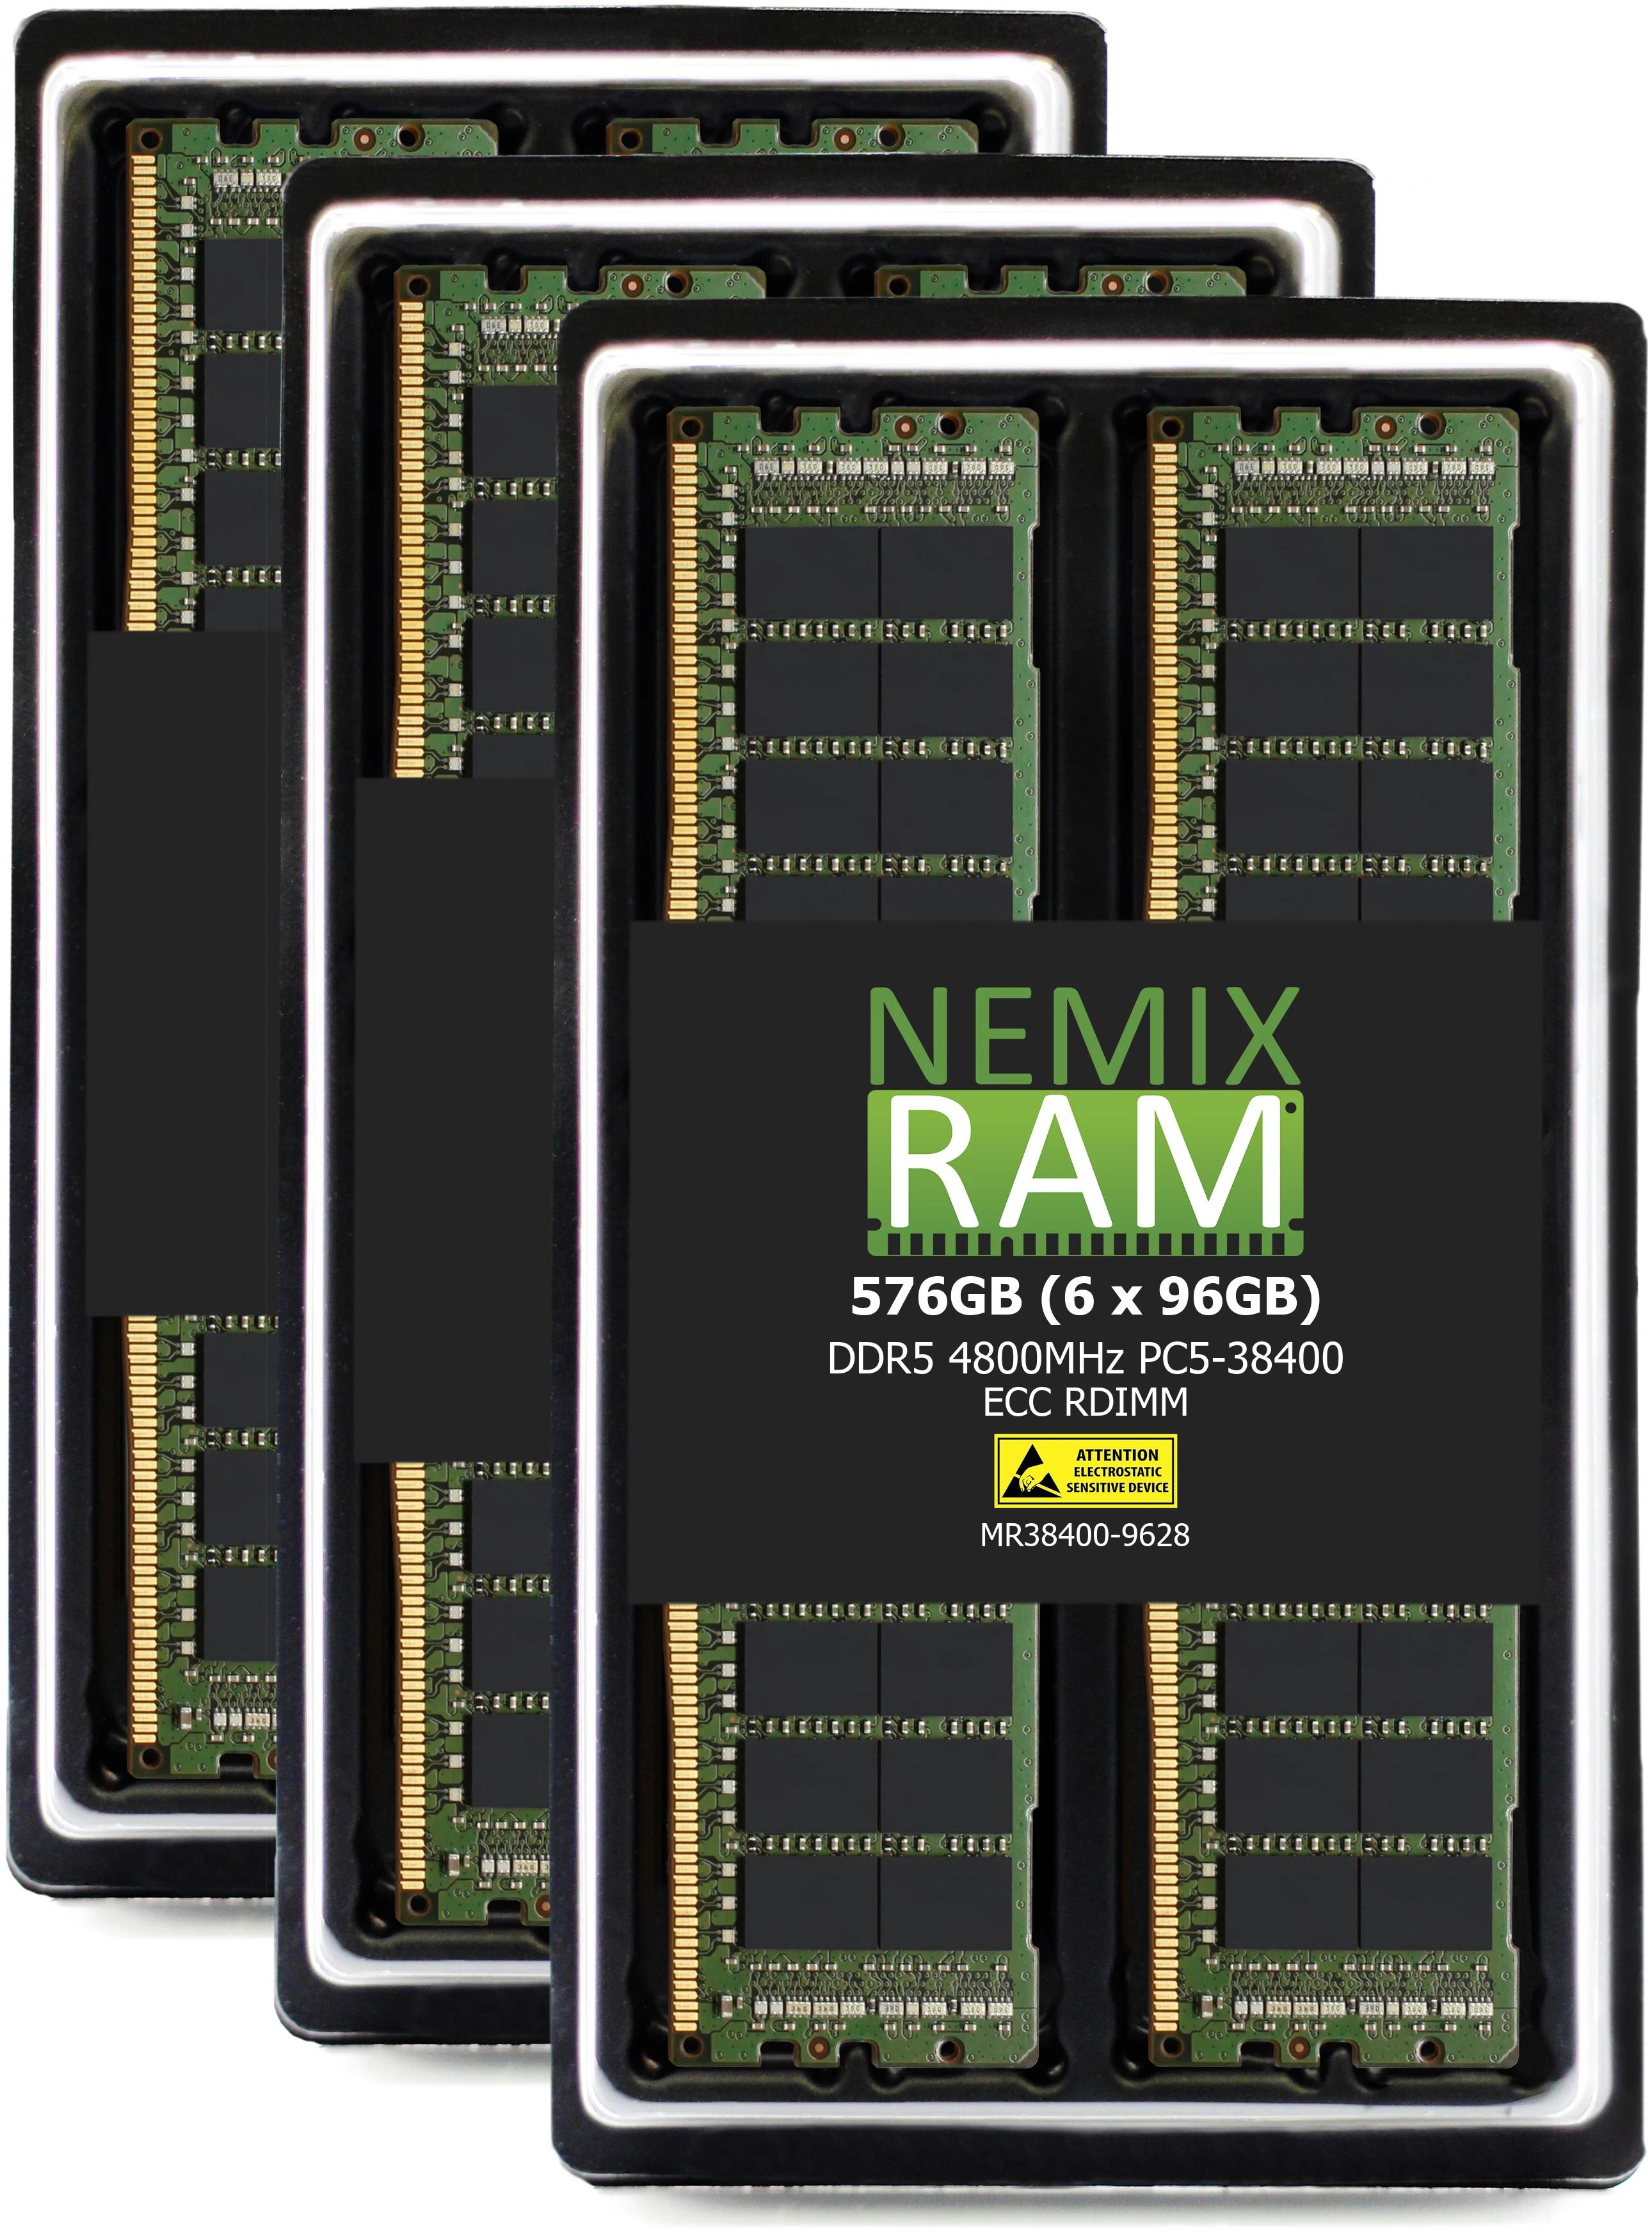 THINKMATE - GPX-WS-740RTP7 Workstation Memory Upgrade